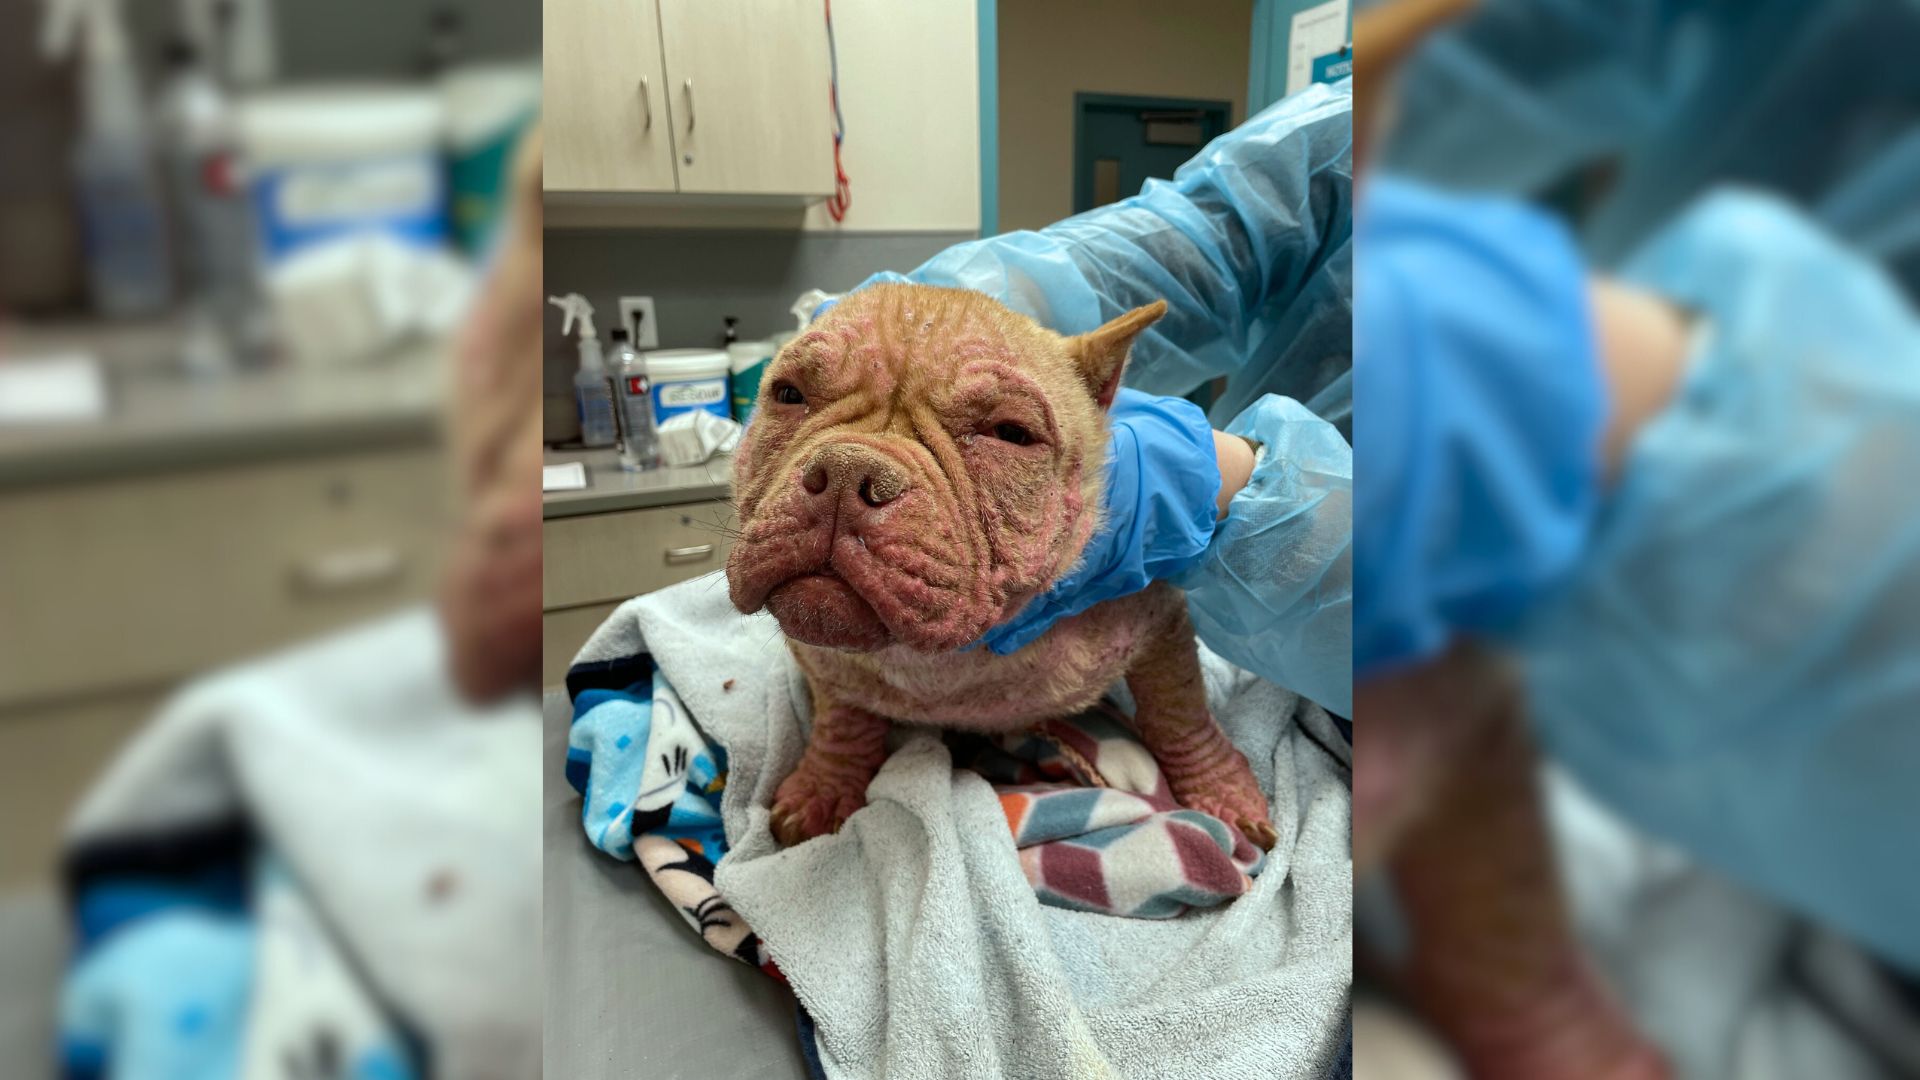 Shelter Dog Was In Agony Until Great People Helped Him Make An Amazing Recovery